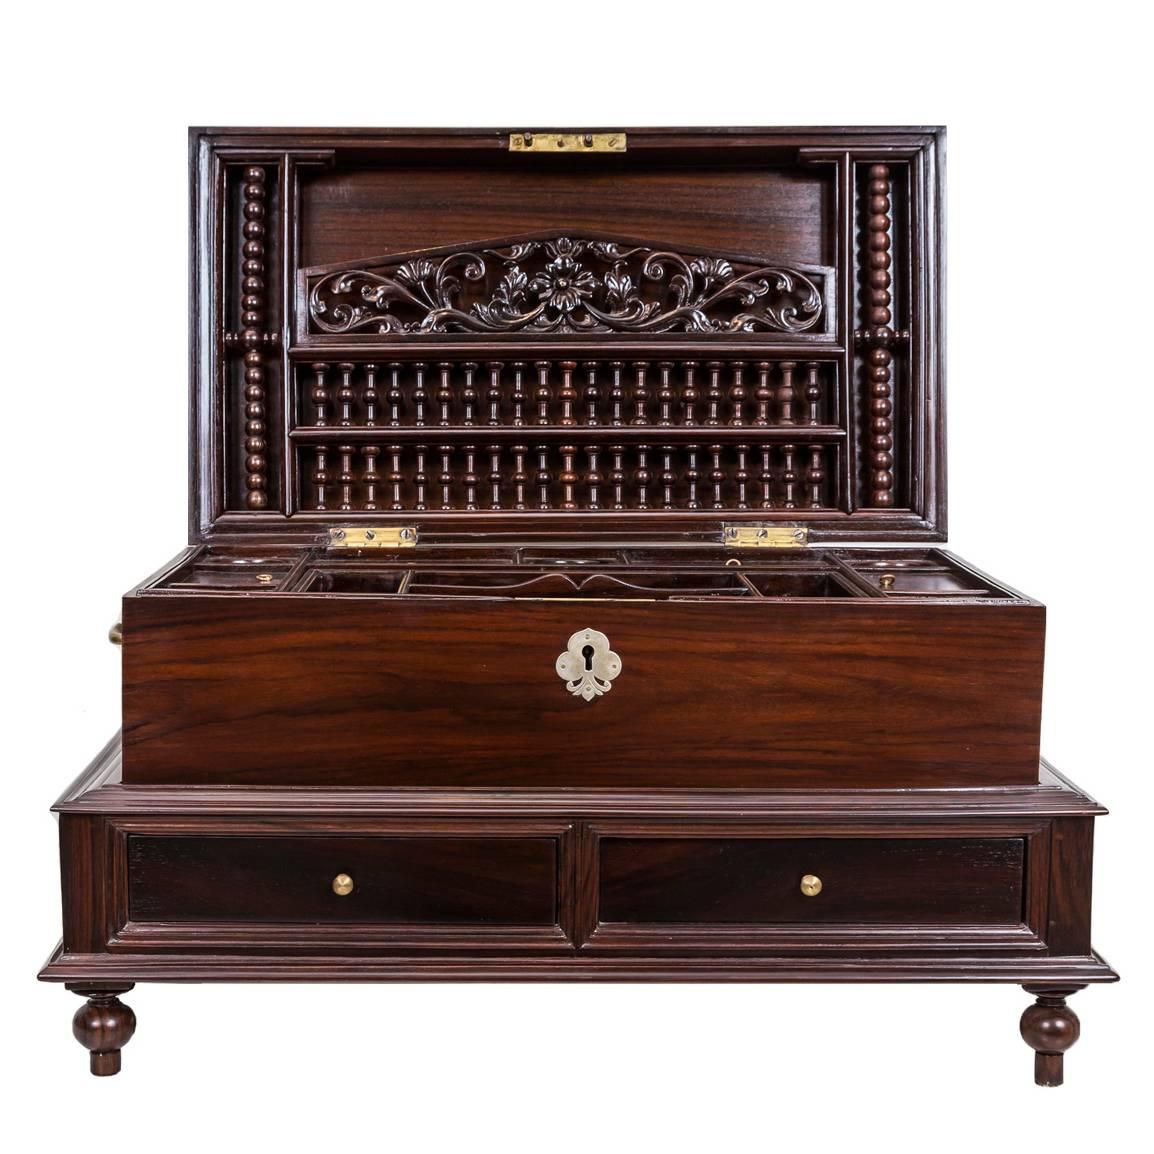 Indo-Dutch or Dutch Colonial Rosewood Box on Stand